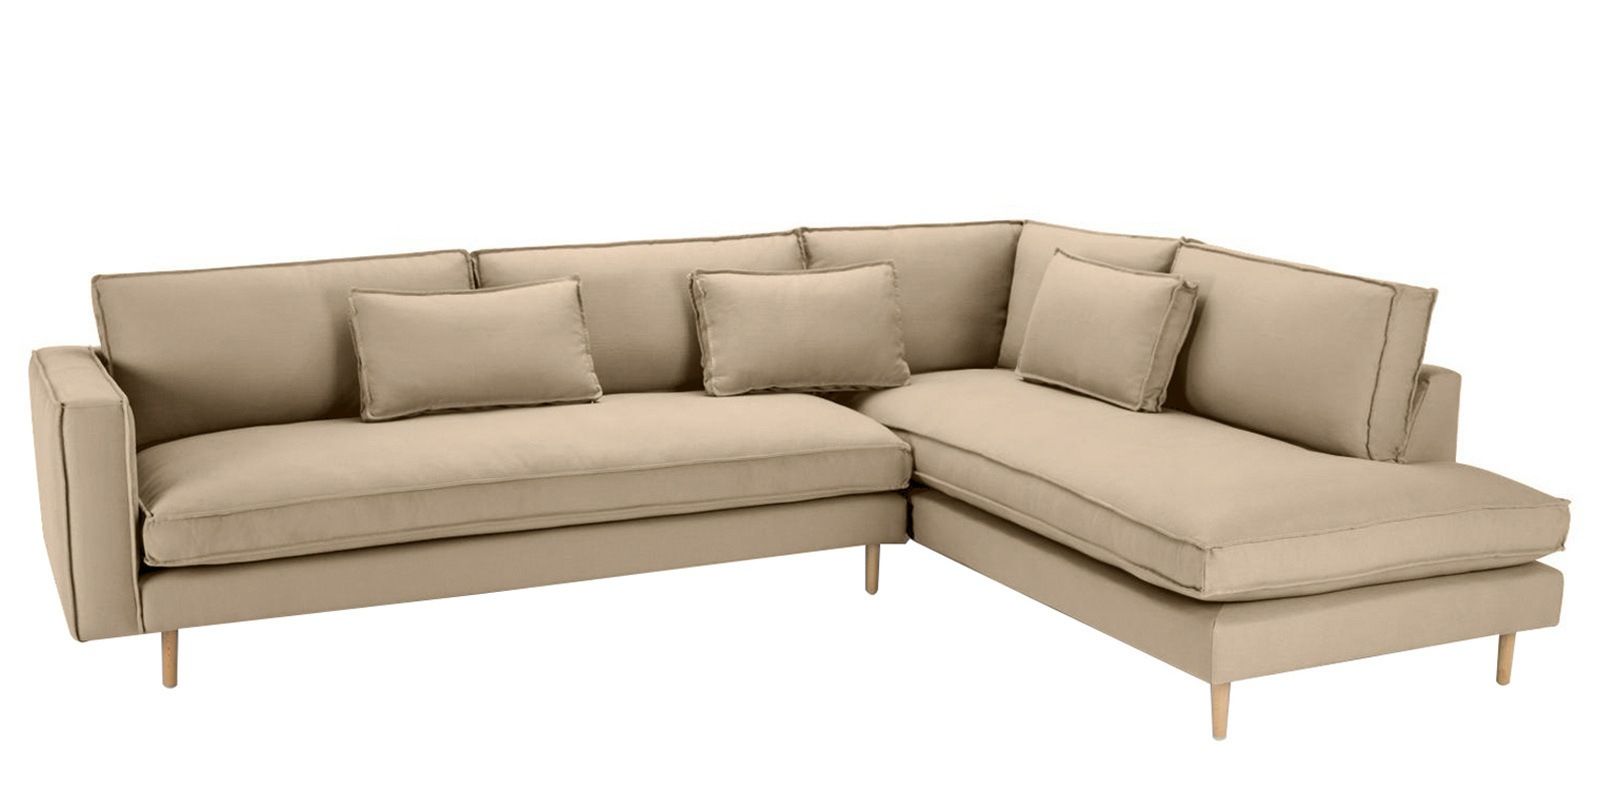 Modular Lhs Three Seater Sofa With Lounger In Beige Colour Regarding Dream Navy 3 Piece Modular Sofas (View 13 of 15)